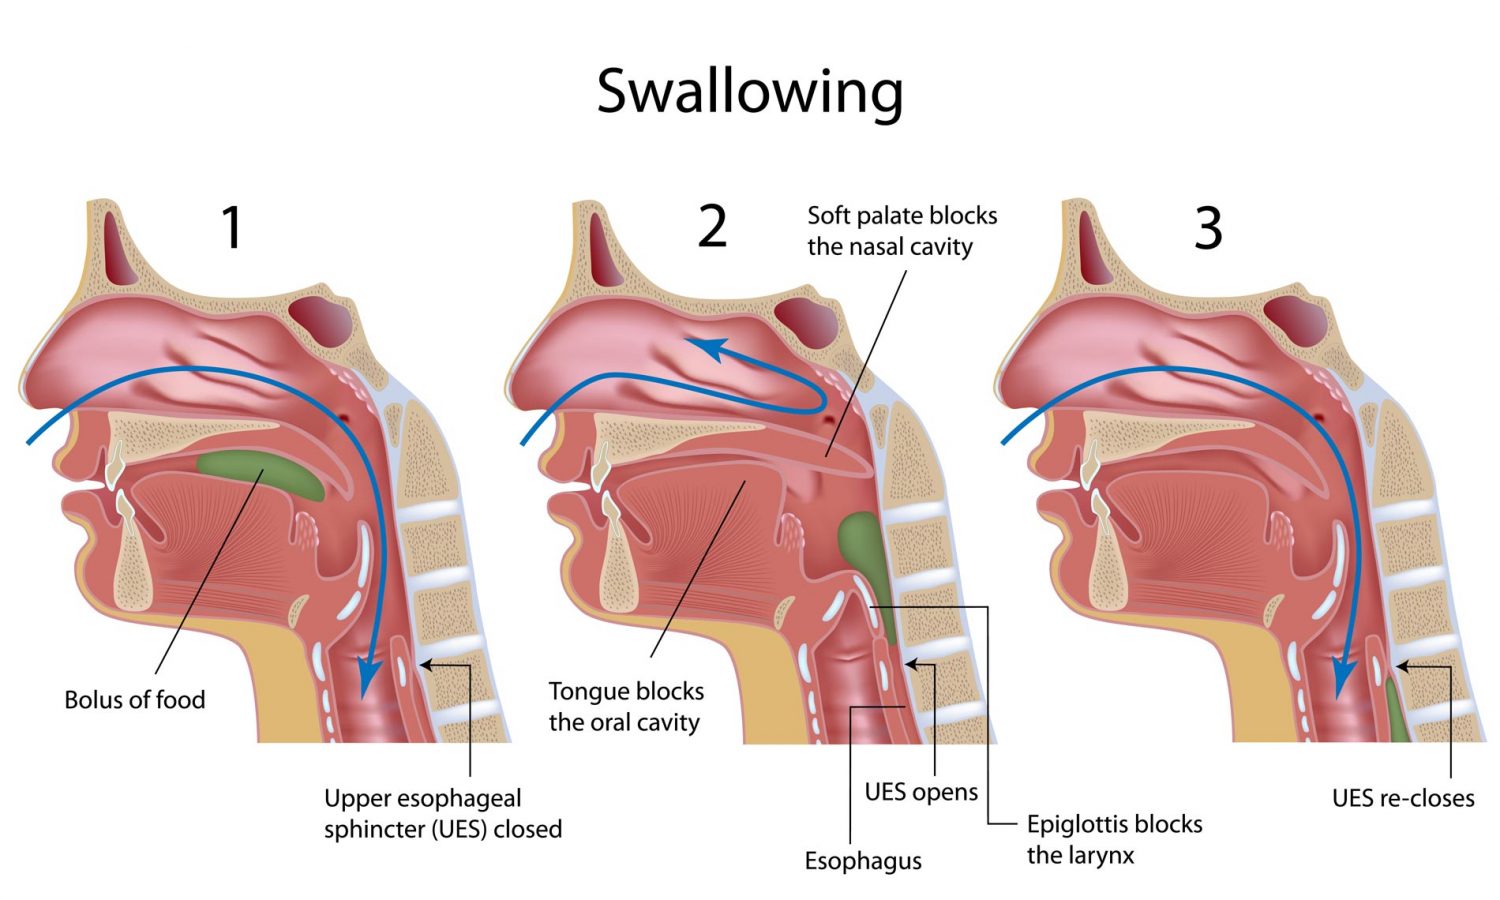 Swallowing Meaning and Definition